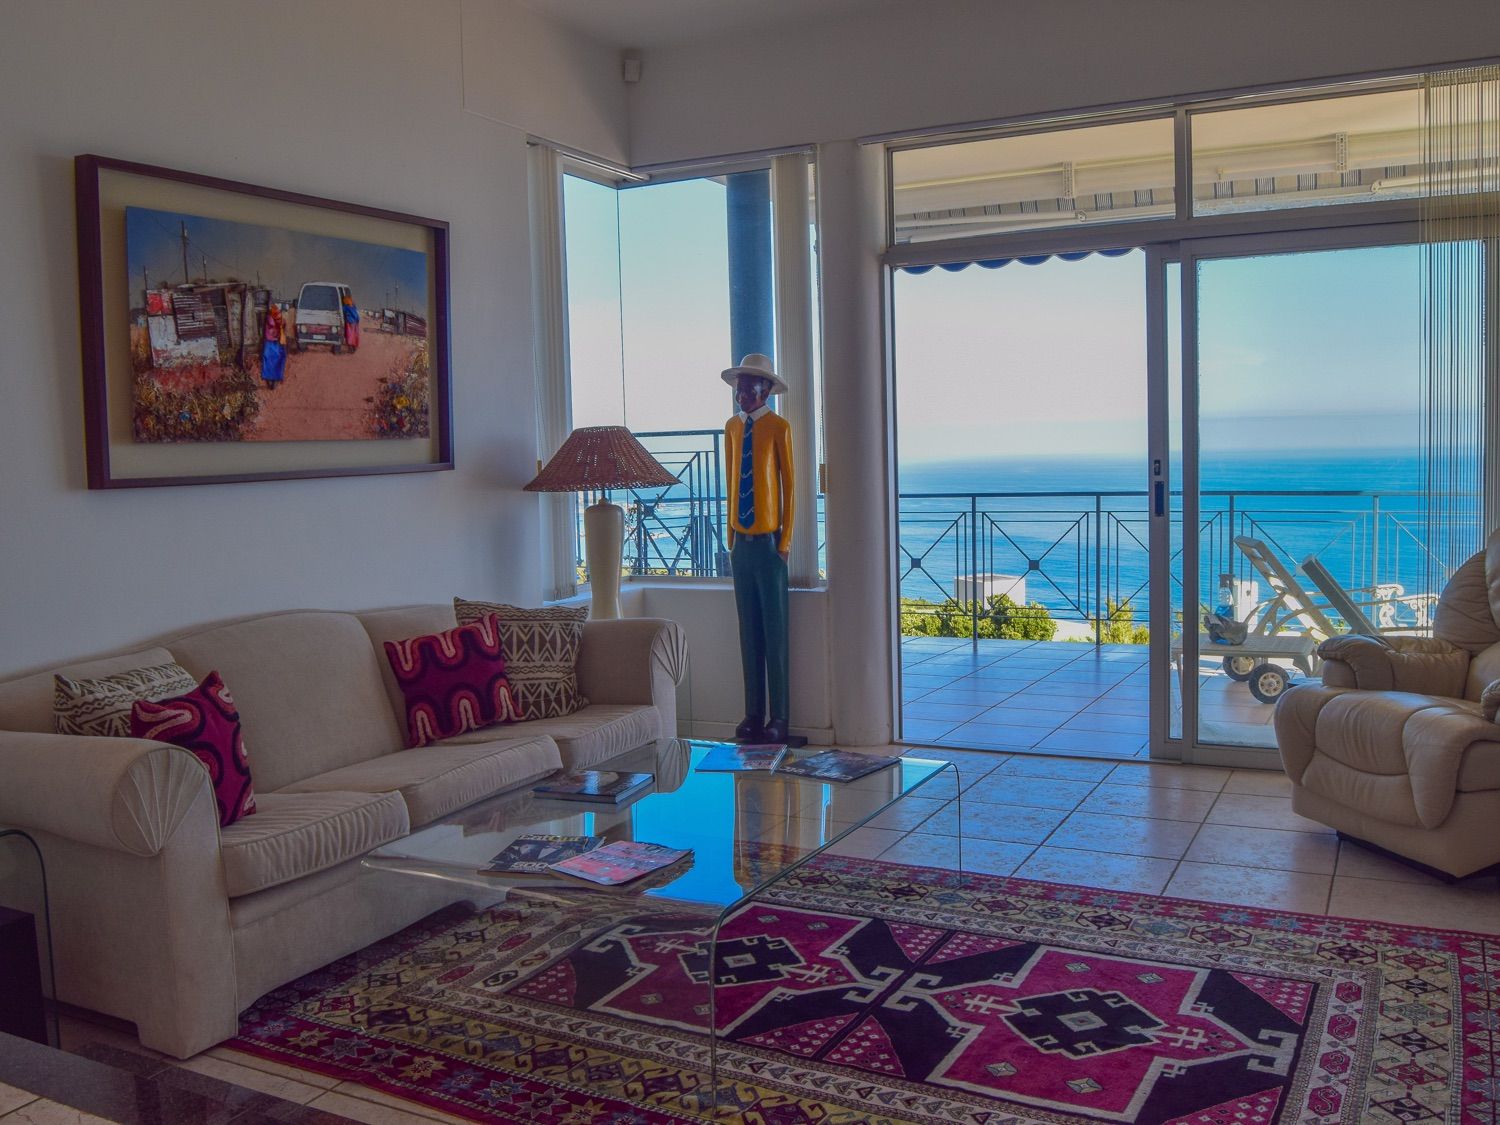 Photo 13 of Oceanscape Camps Bay accommodation in Camps Bay, Cape Town with 4 bedrooms and 4 bathrooms